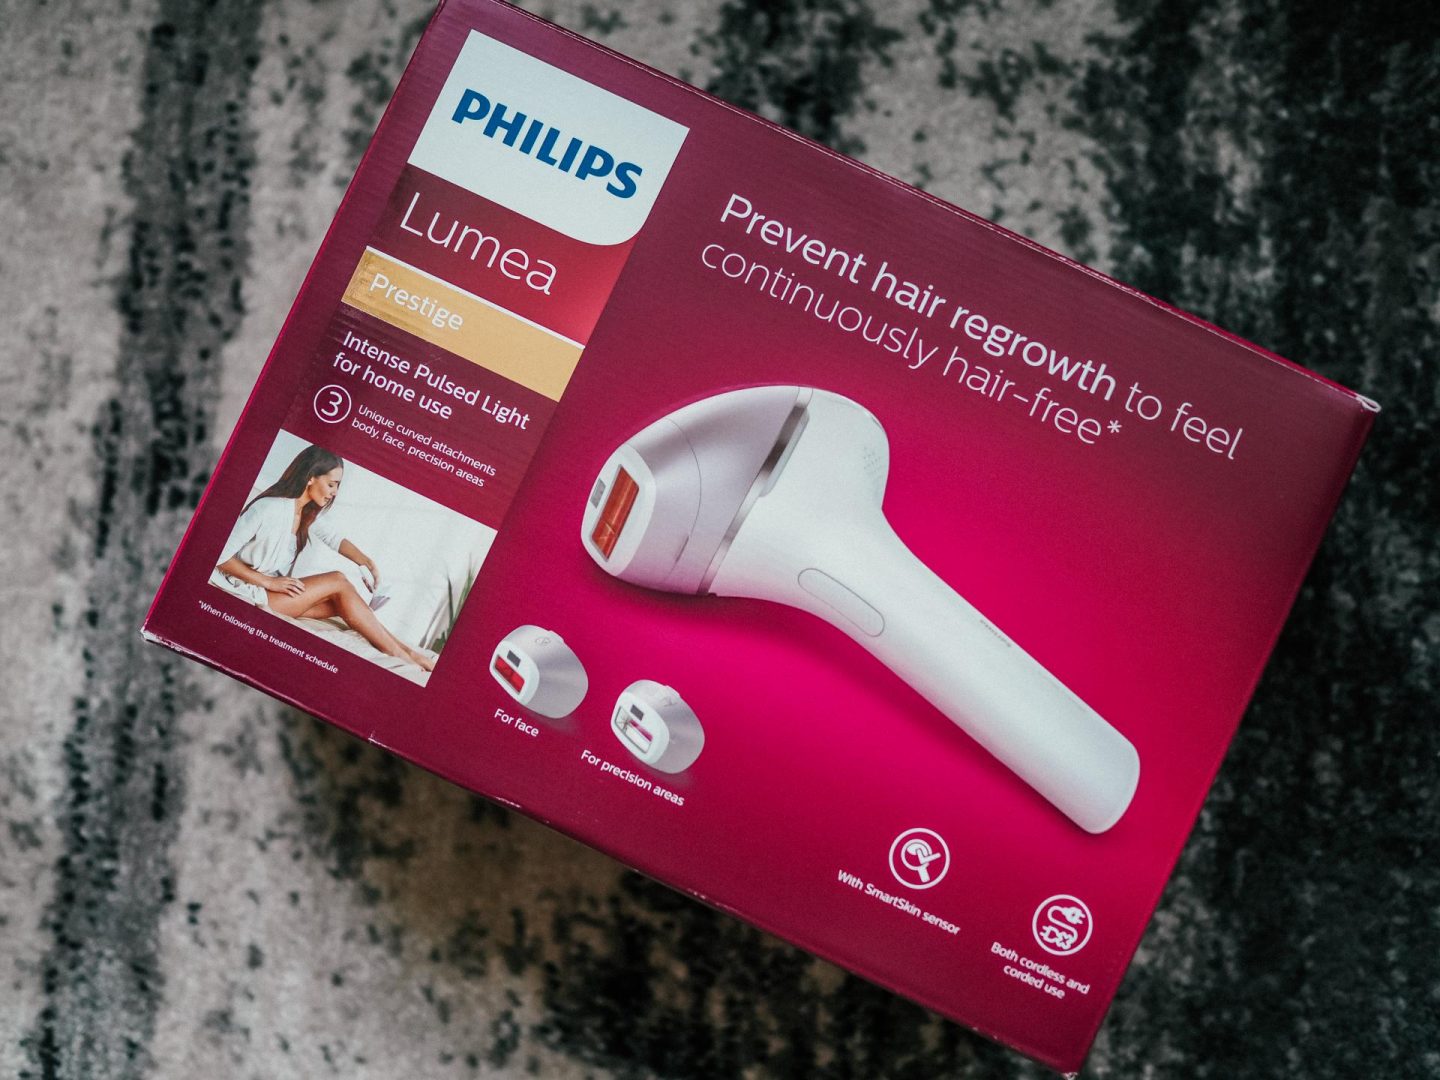 Specialist Comparable Cook At-home IPL: Testing Out the New Philips Lumea Prestige